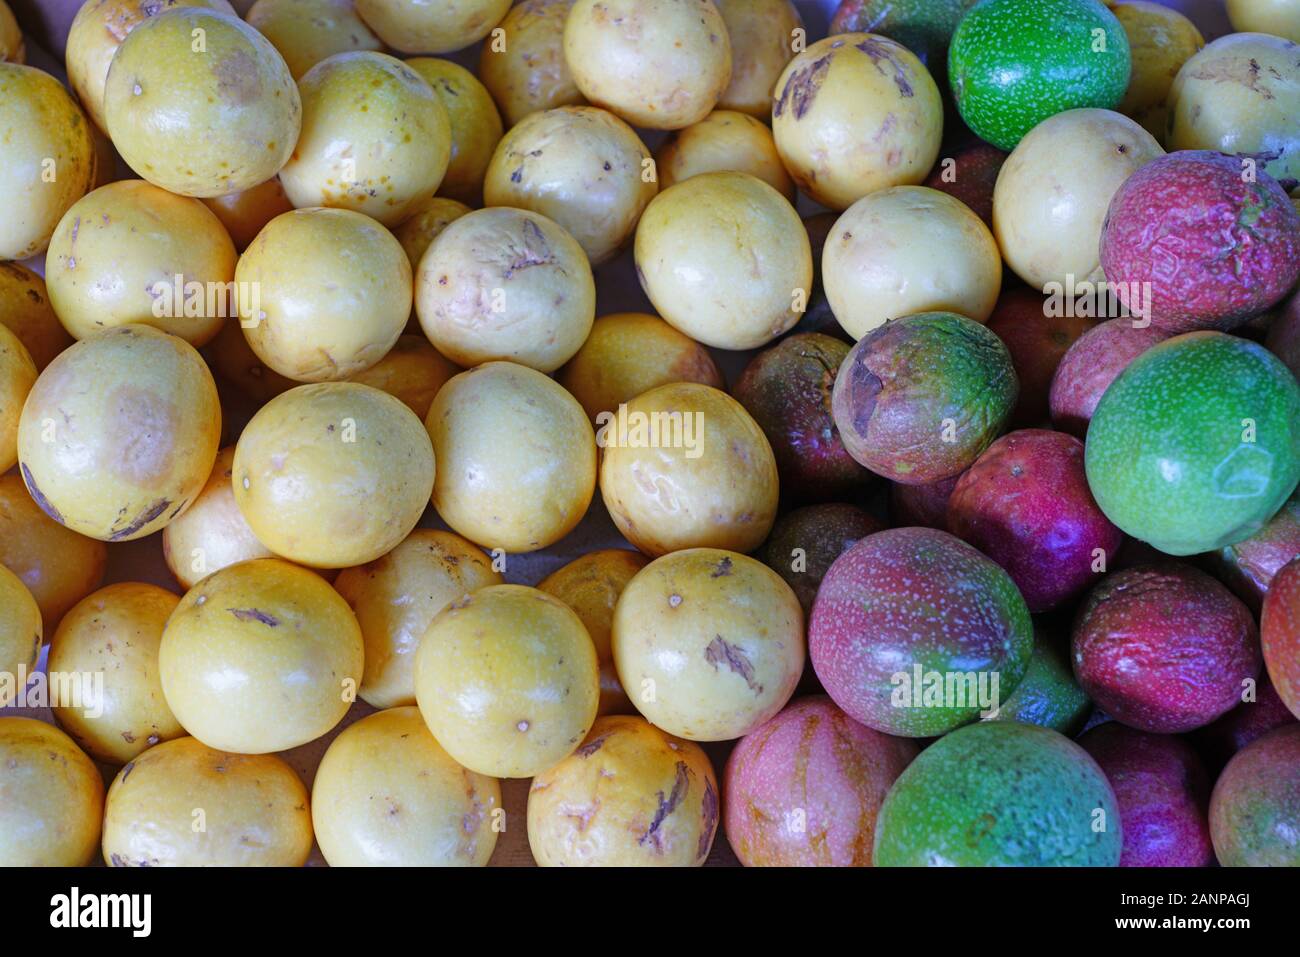 Crate of colorful ripe passion fruits at a food market Stock Photo